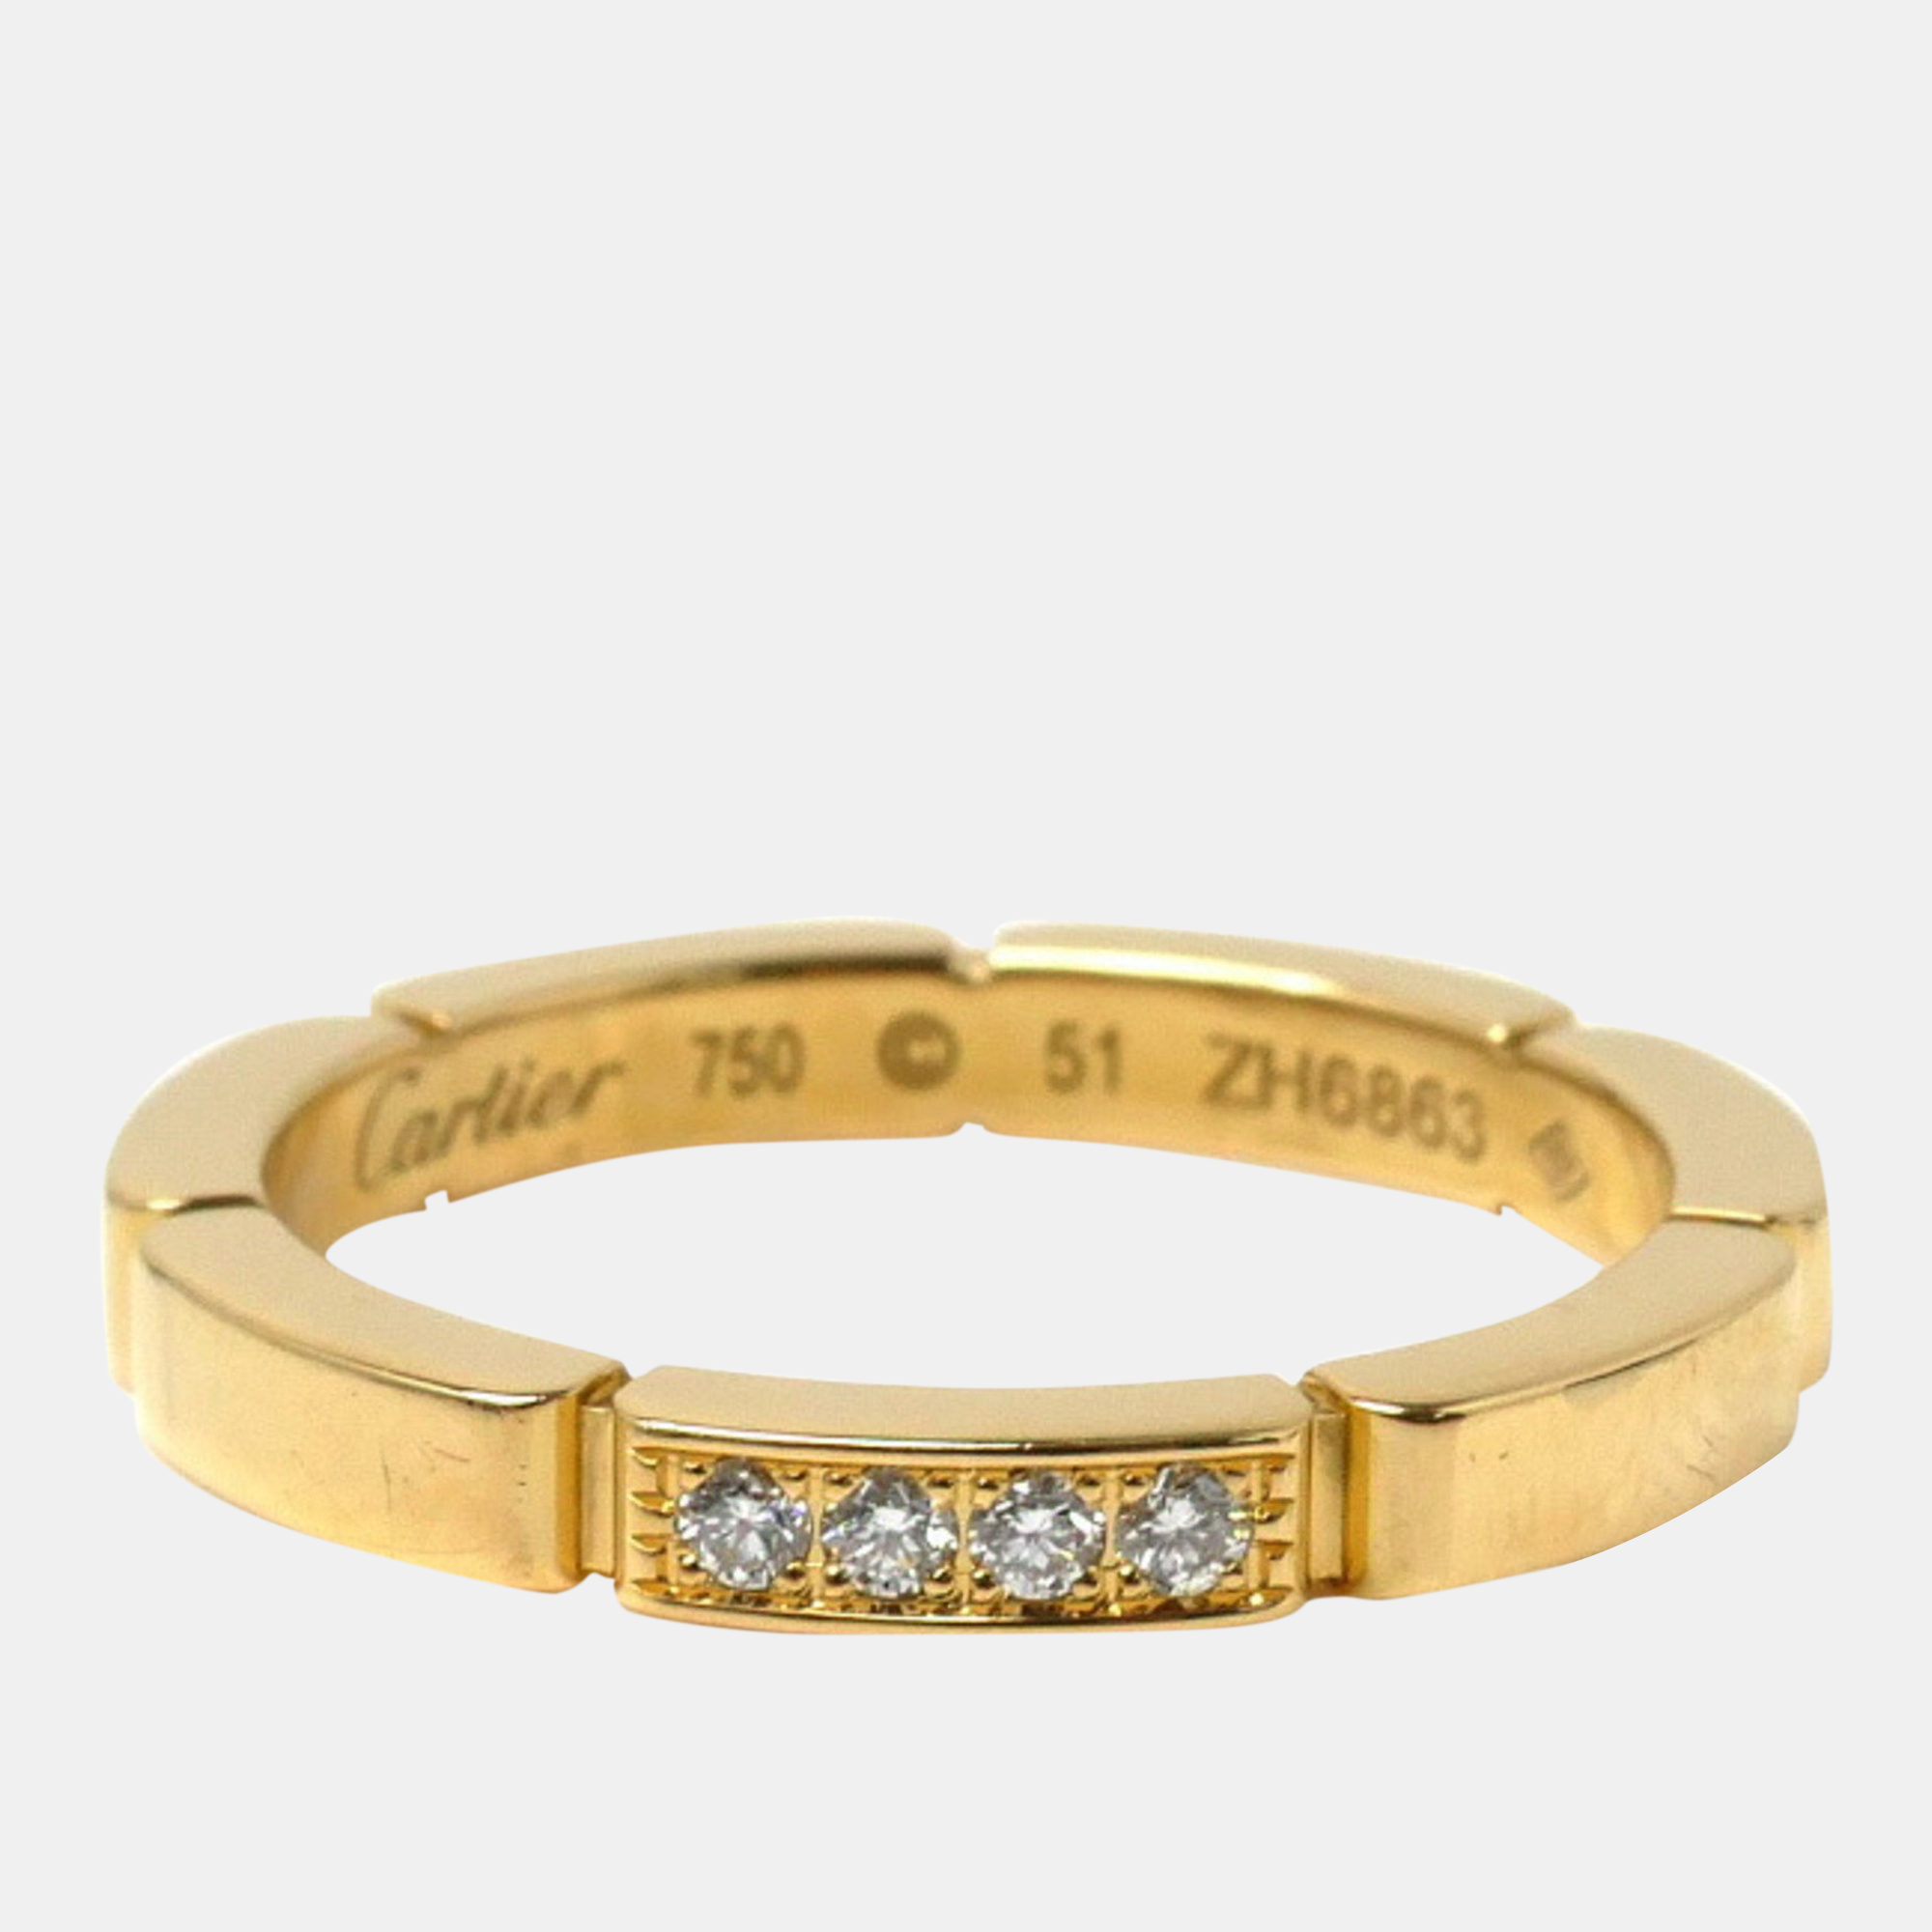 Pre-owned Cartier 18k Yellow Gold And Diamond Maillon Panthere Wedding Band Ring Eu 51